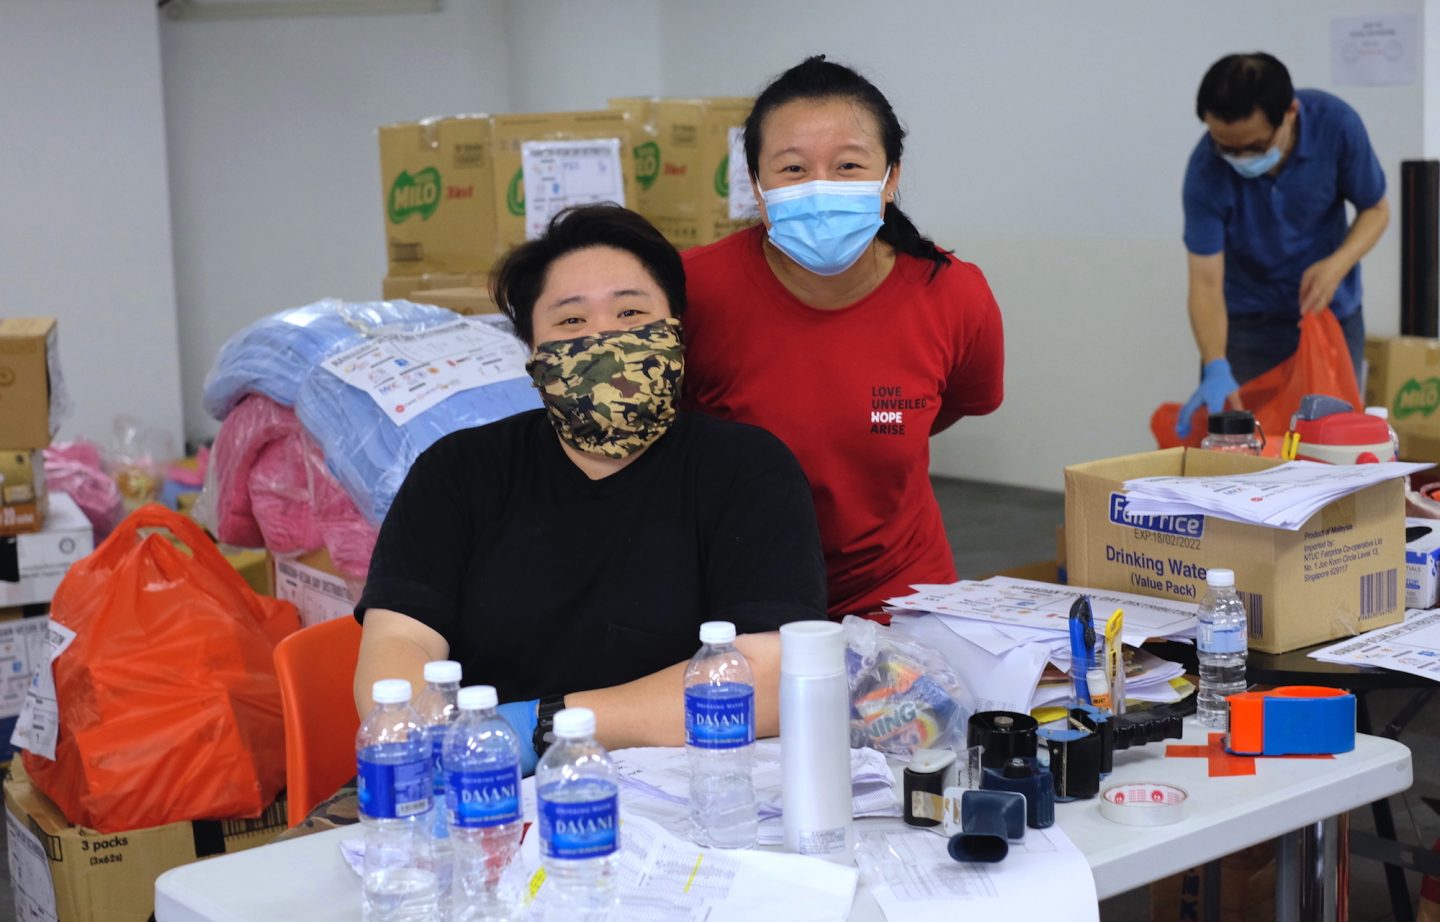 Volunteers Deborah Quek (in red) and Sharon Teo (in black) were helping out at the event since 6am that morning which Quek describes as "fulfilling". Photo by Tan Huey Ying.